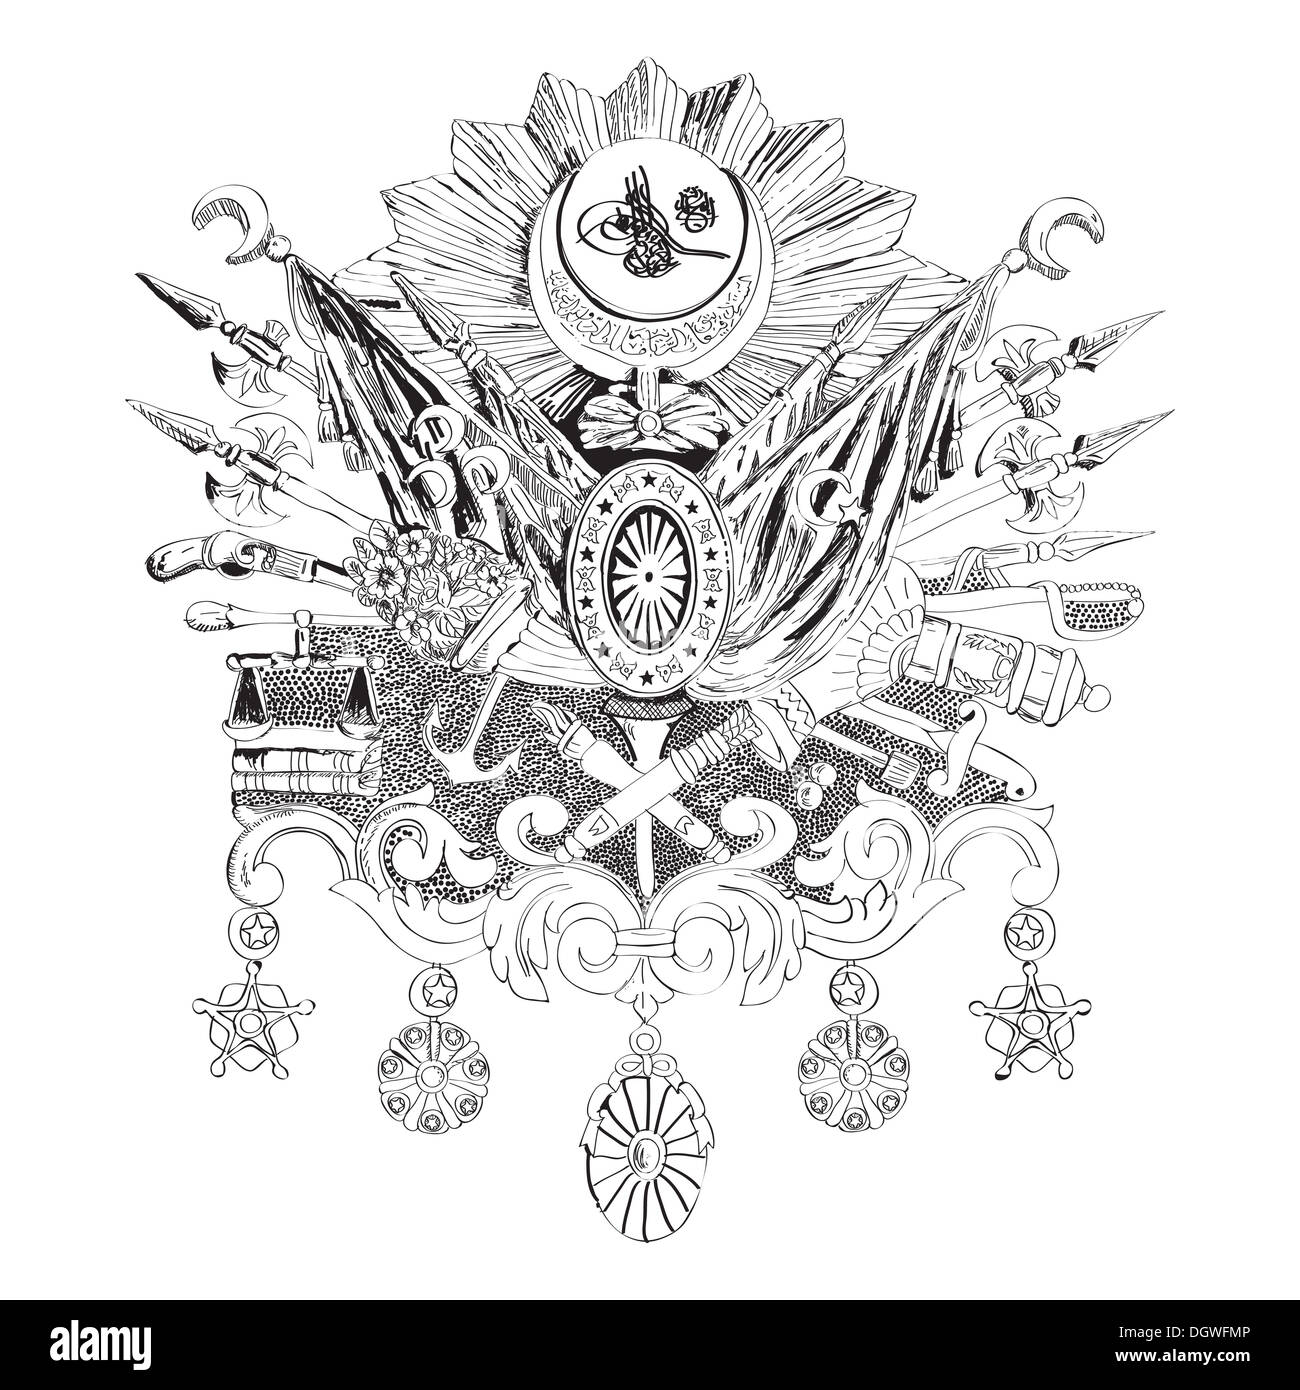 Hand drawn illustration of the Ottoman Empire coat of arms Stock Photo